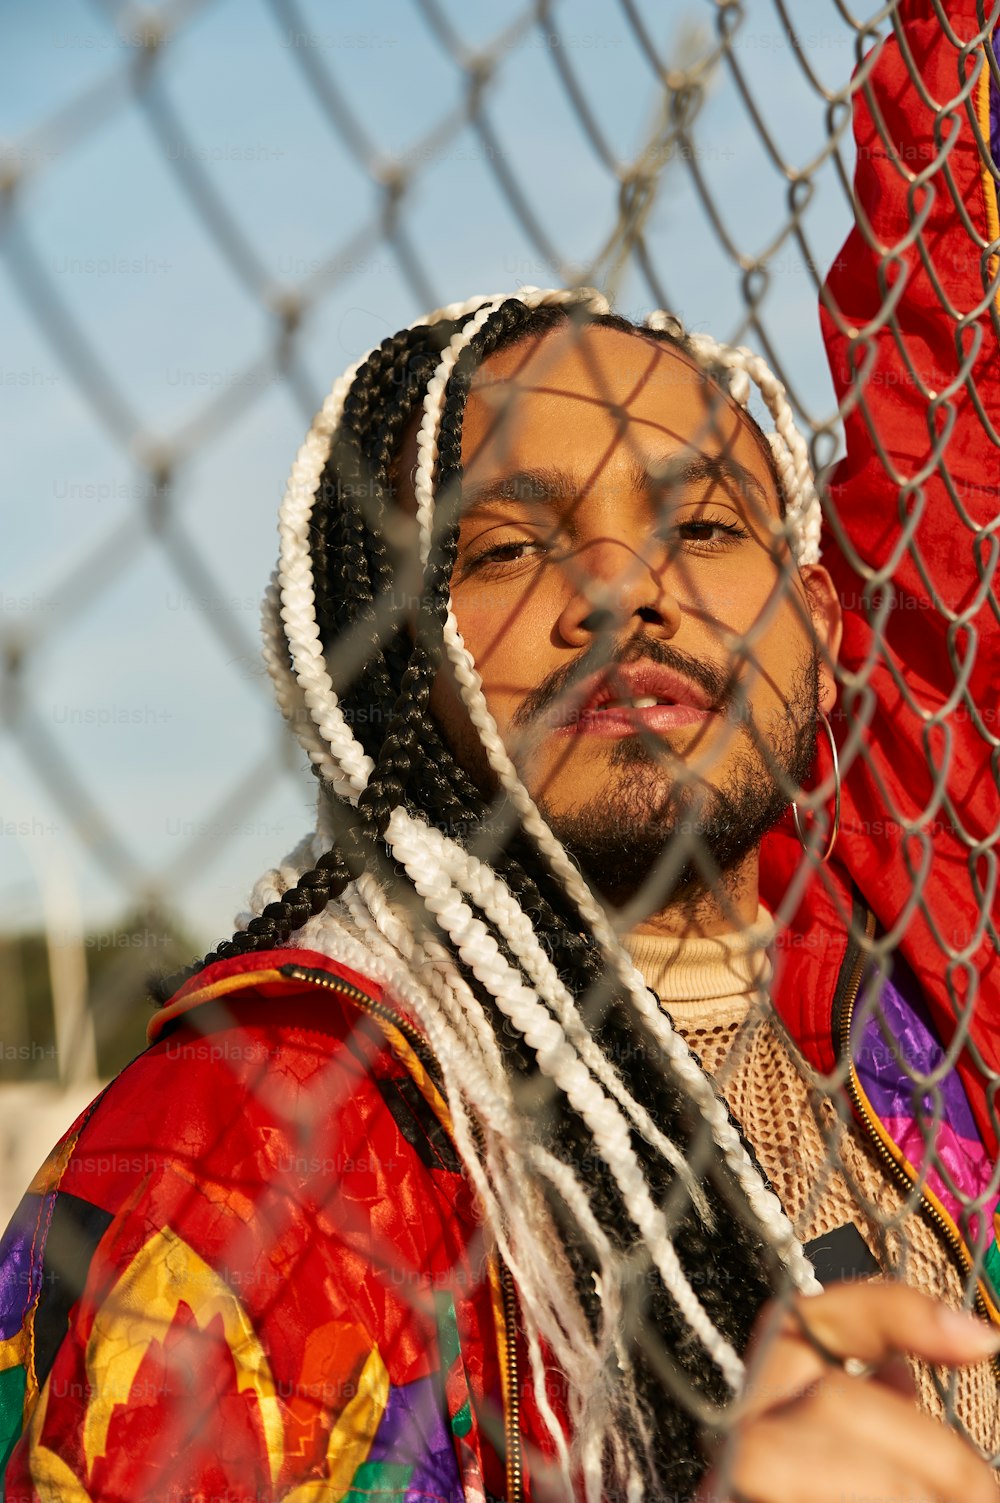 a man with dreadlocks standing behind a chain link fence